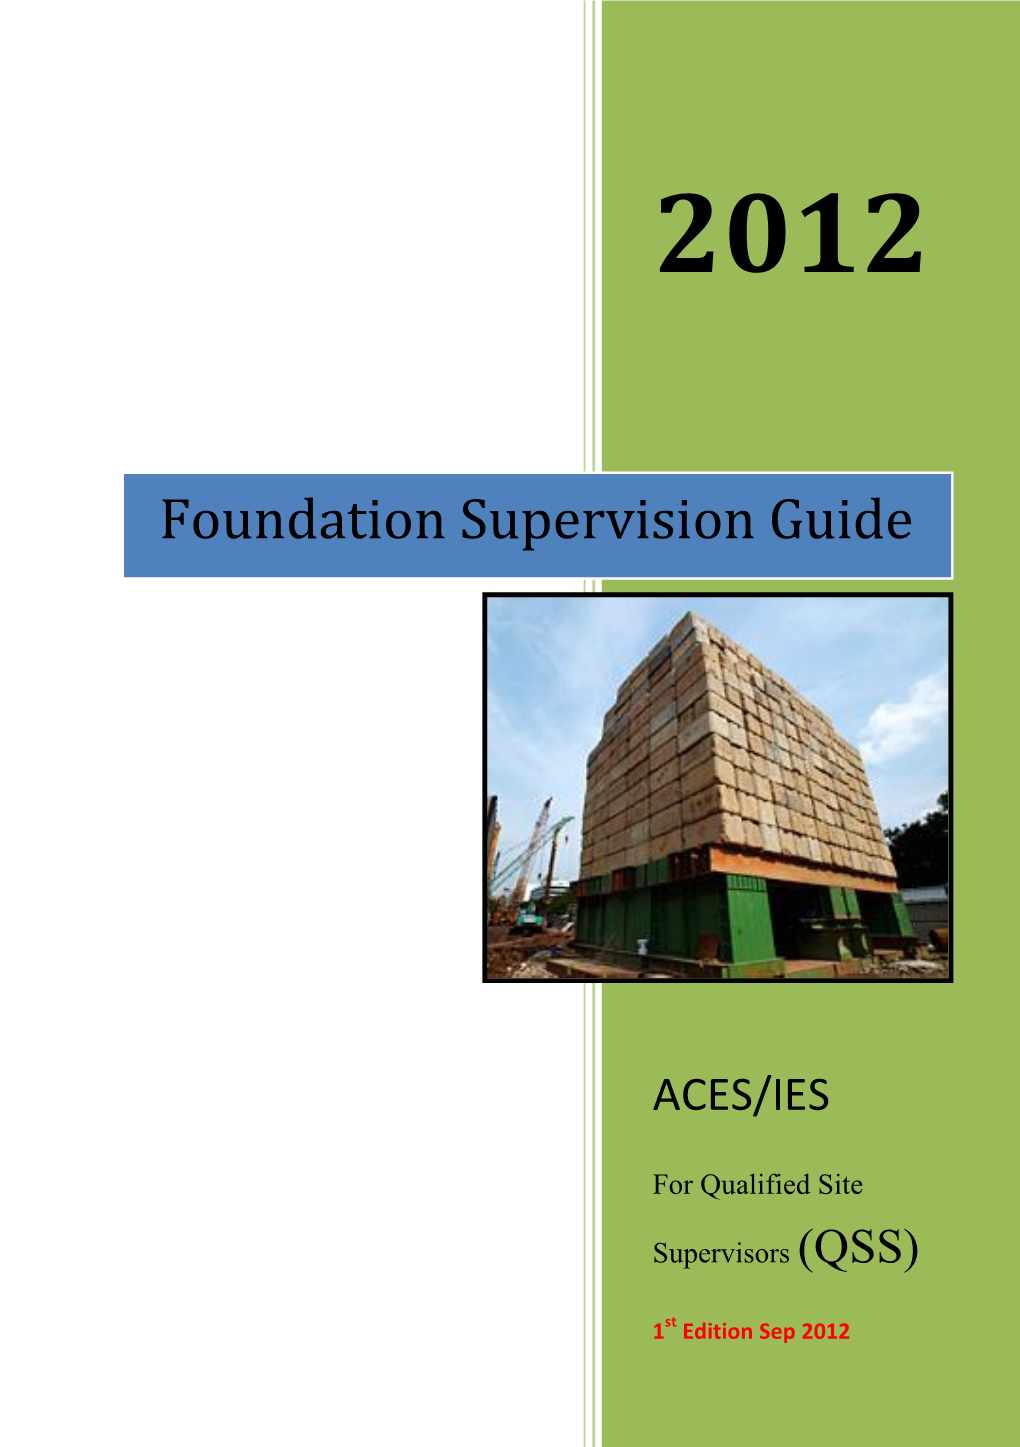 Foundation Supervision Guide